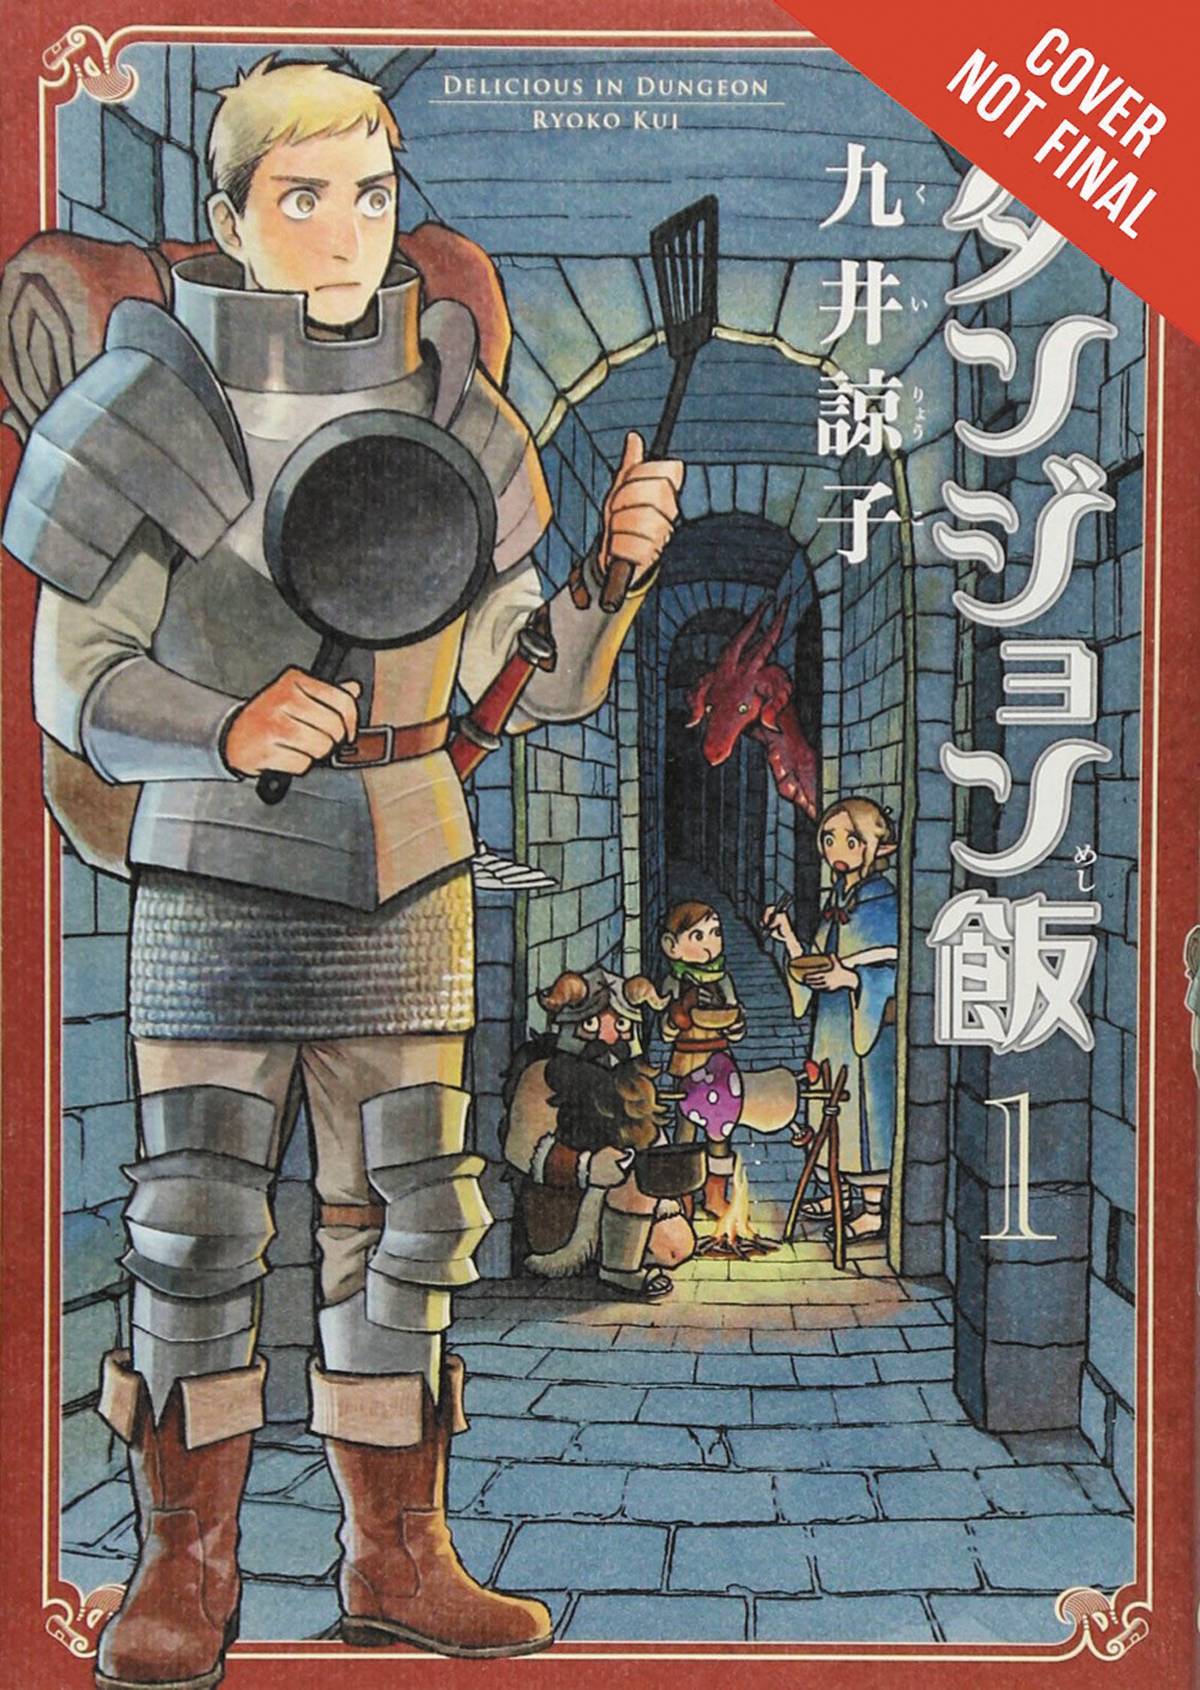 Delicious In Dungeon Vol. 01